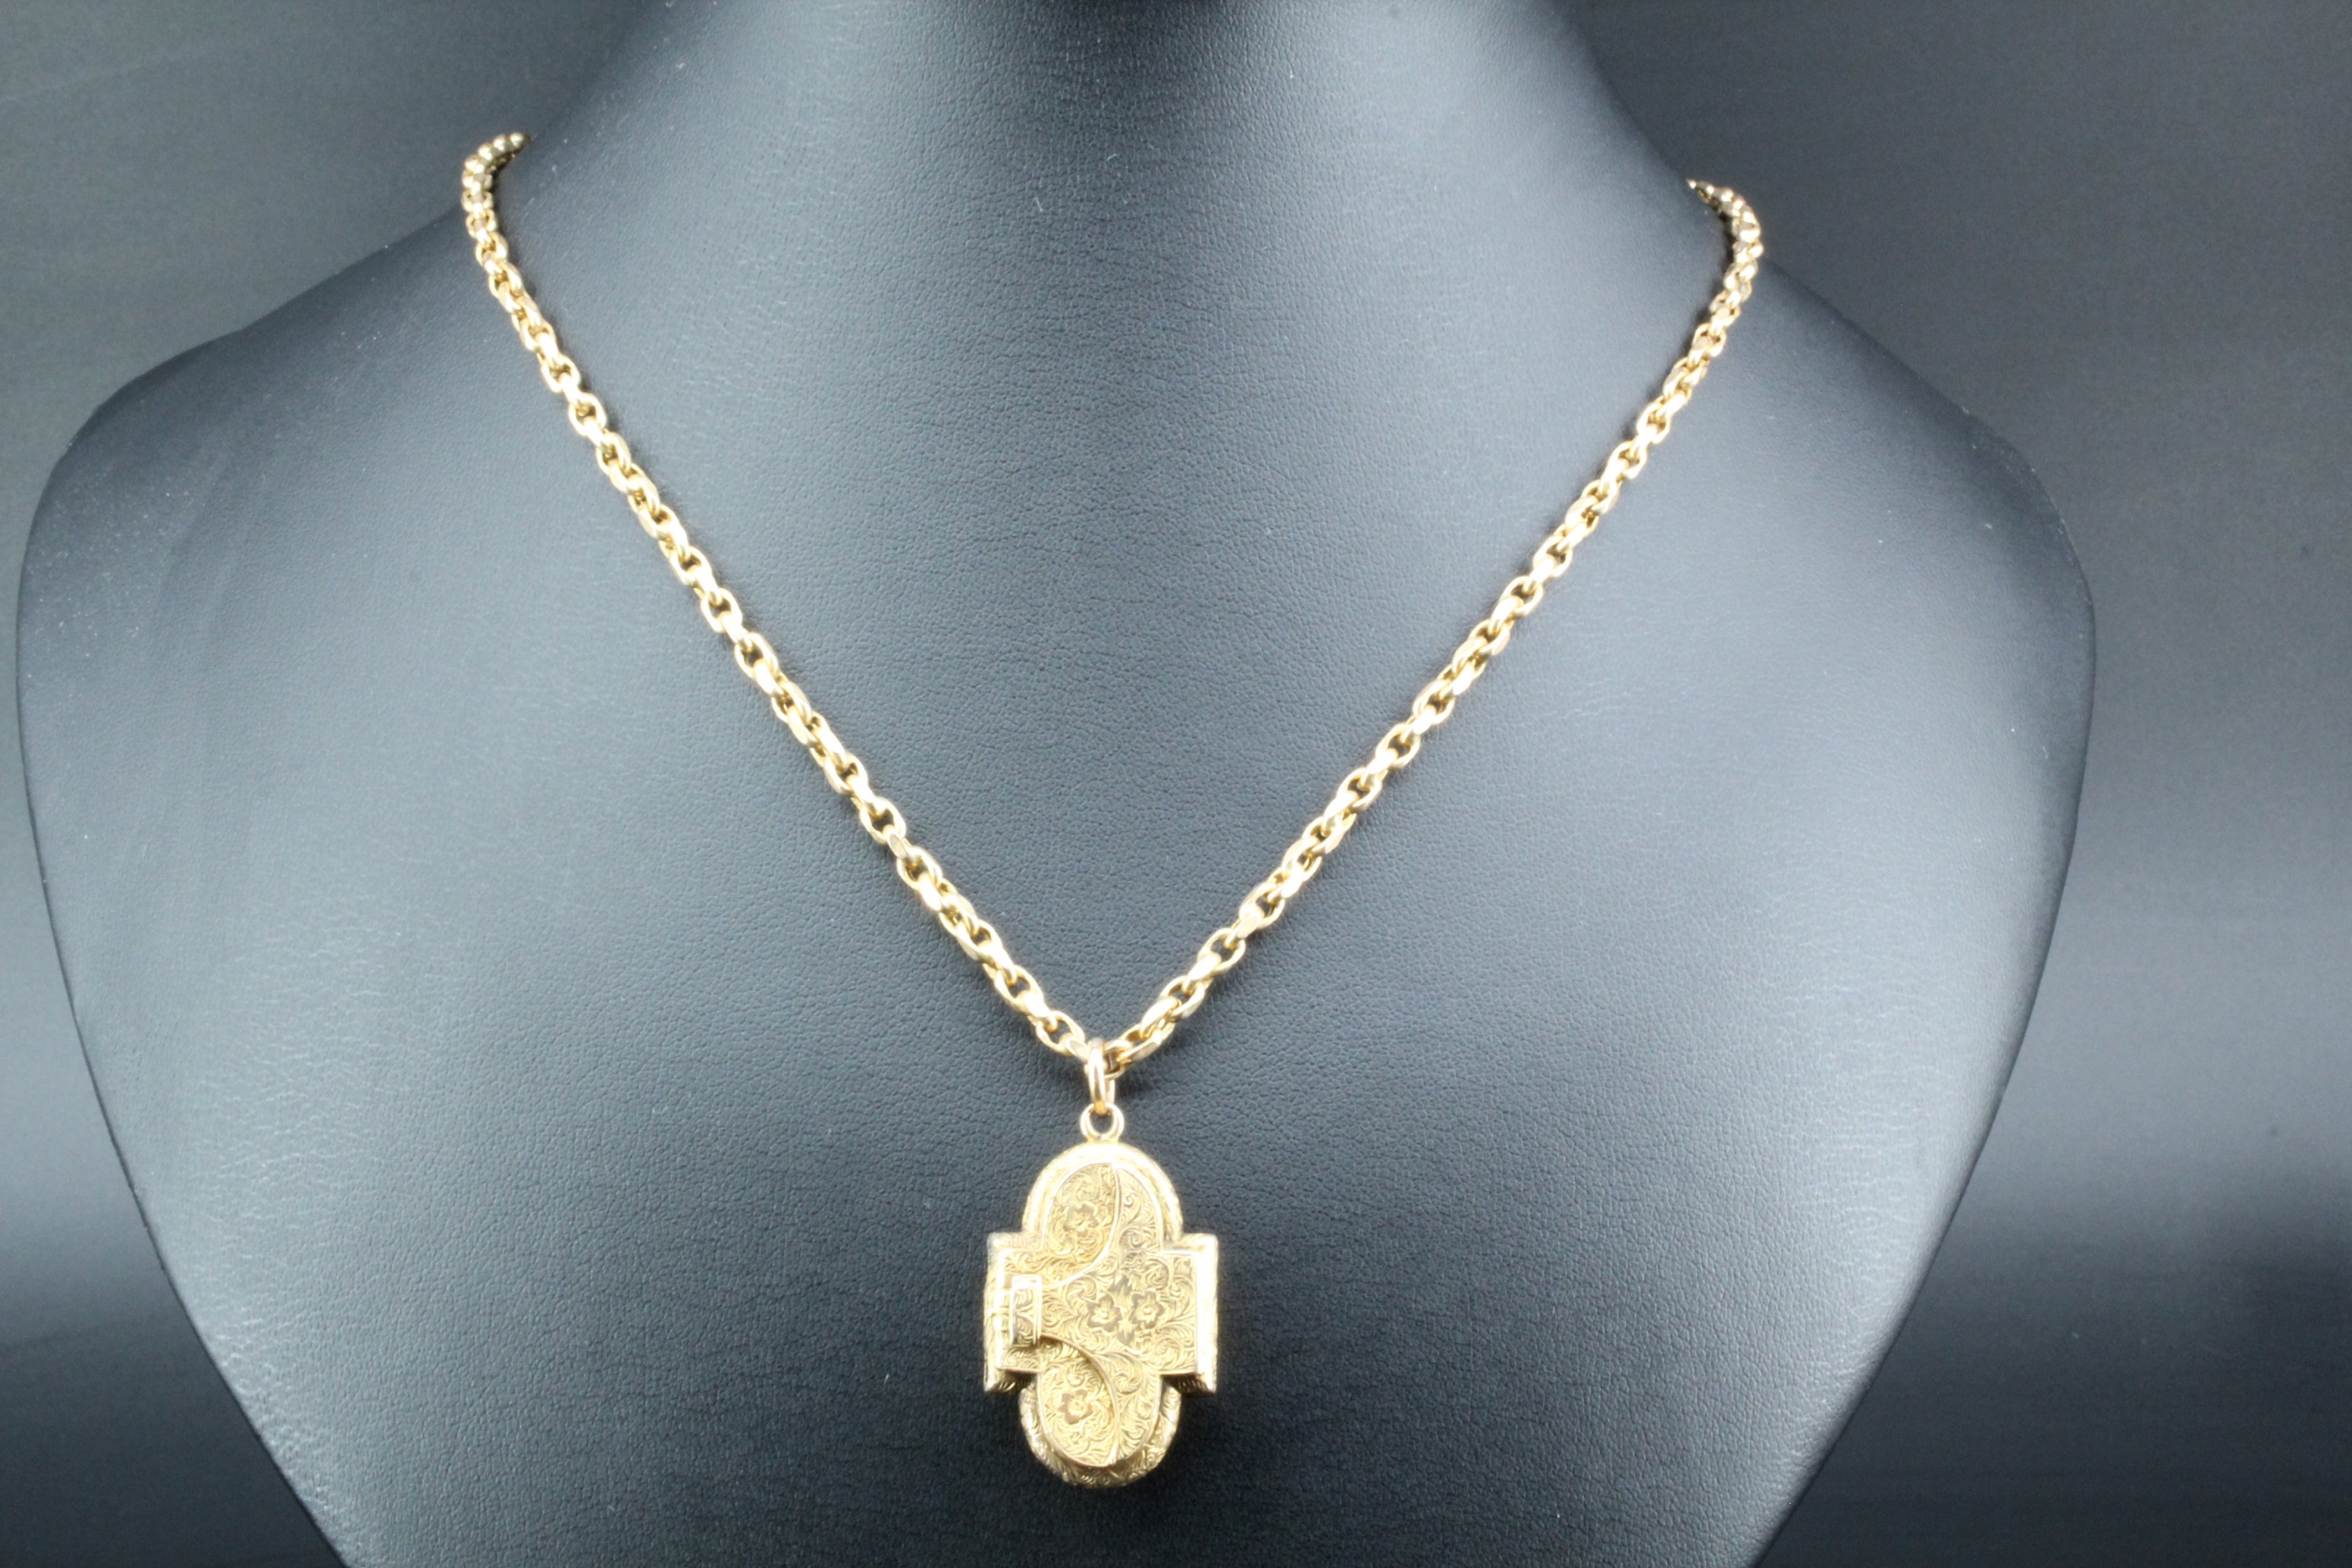 An Edwardian cruciform double locket necklace, the front having double overlapping covers with